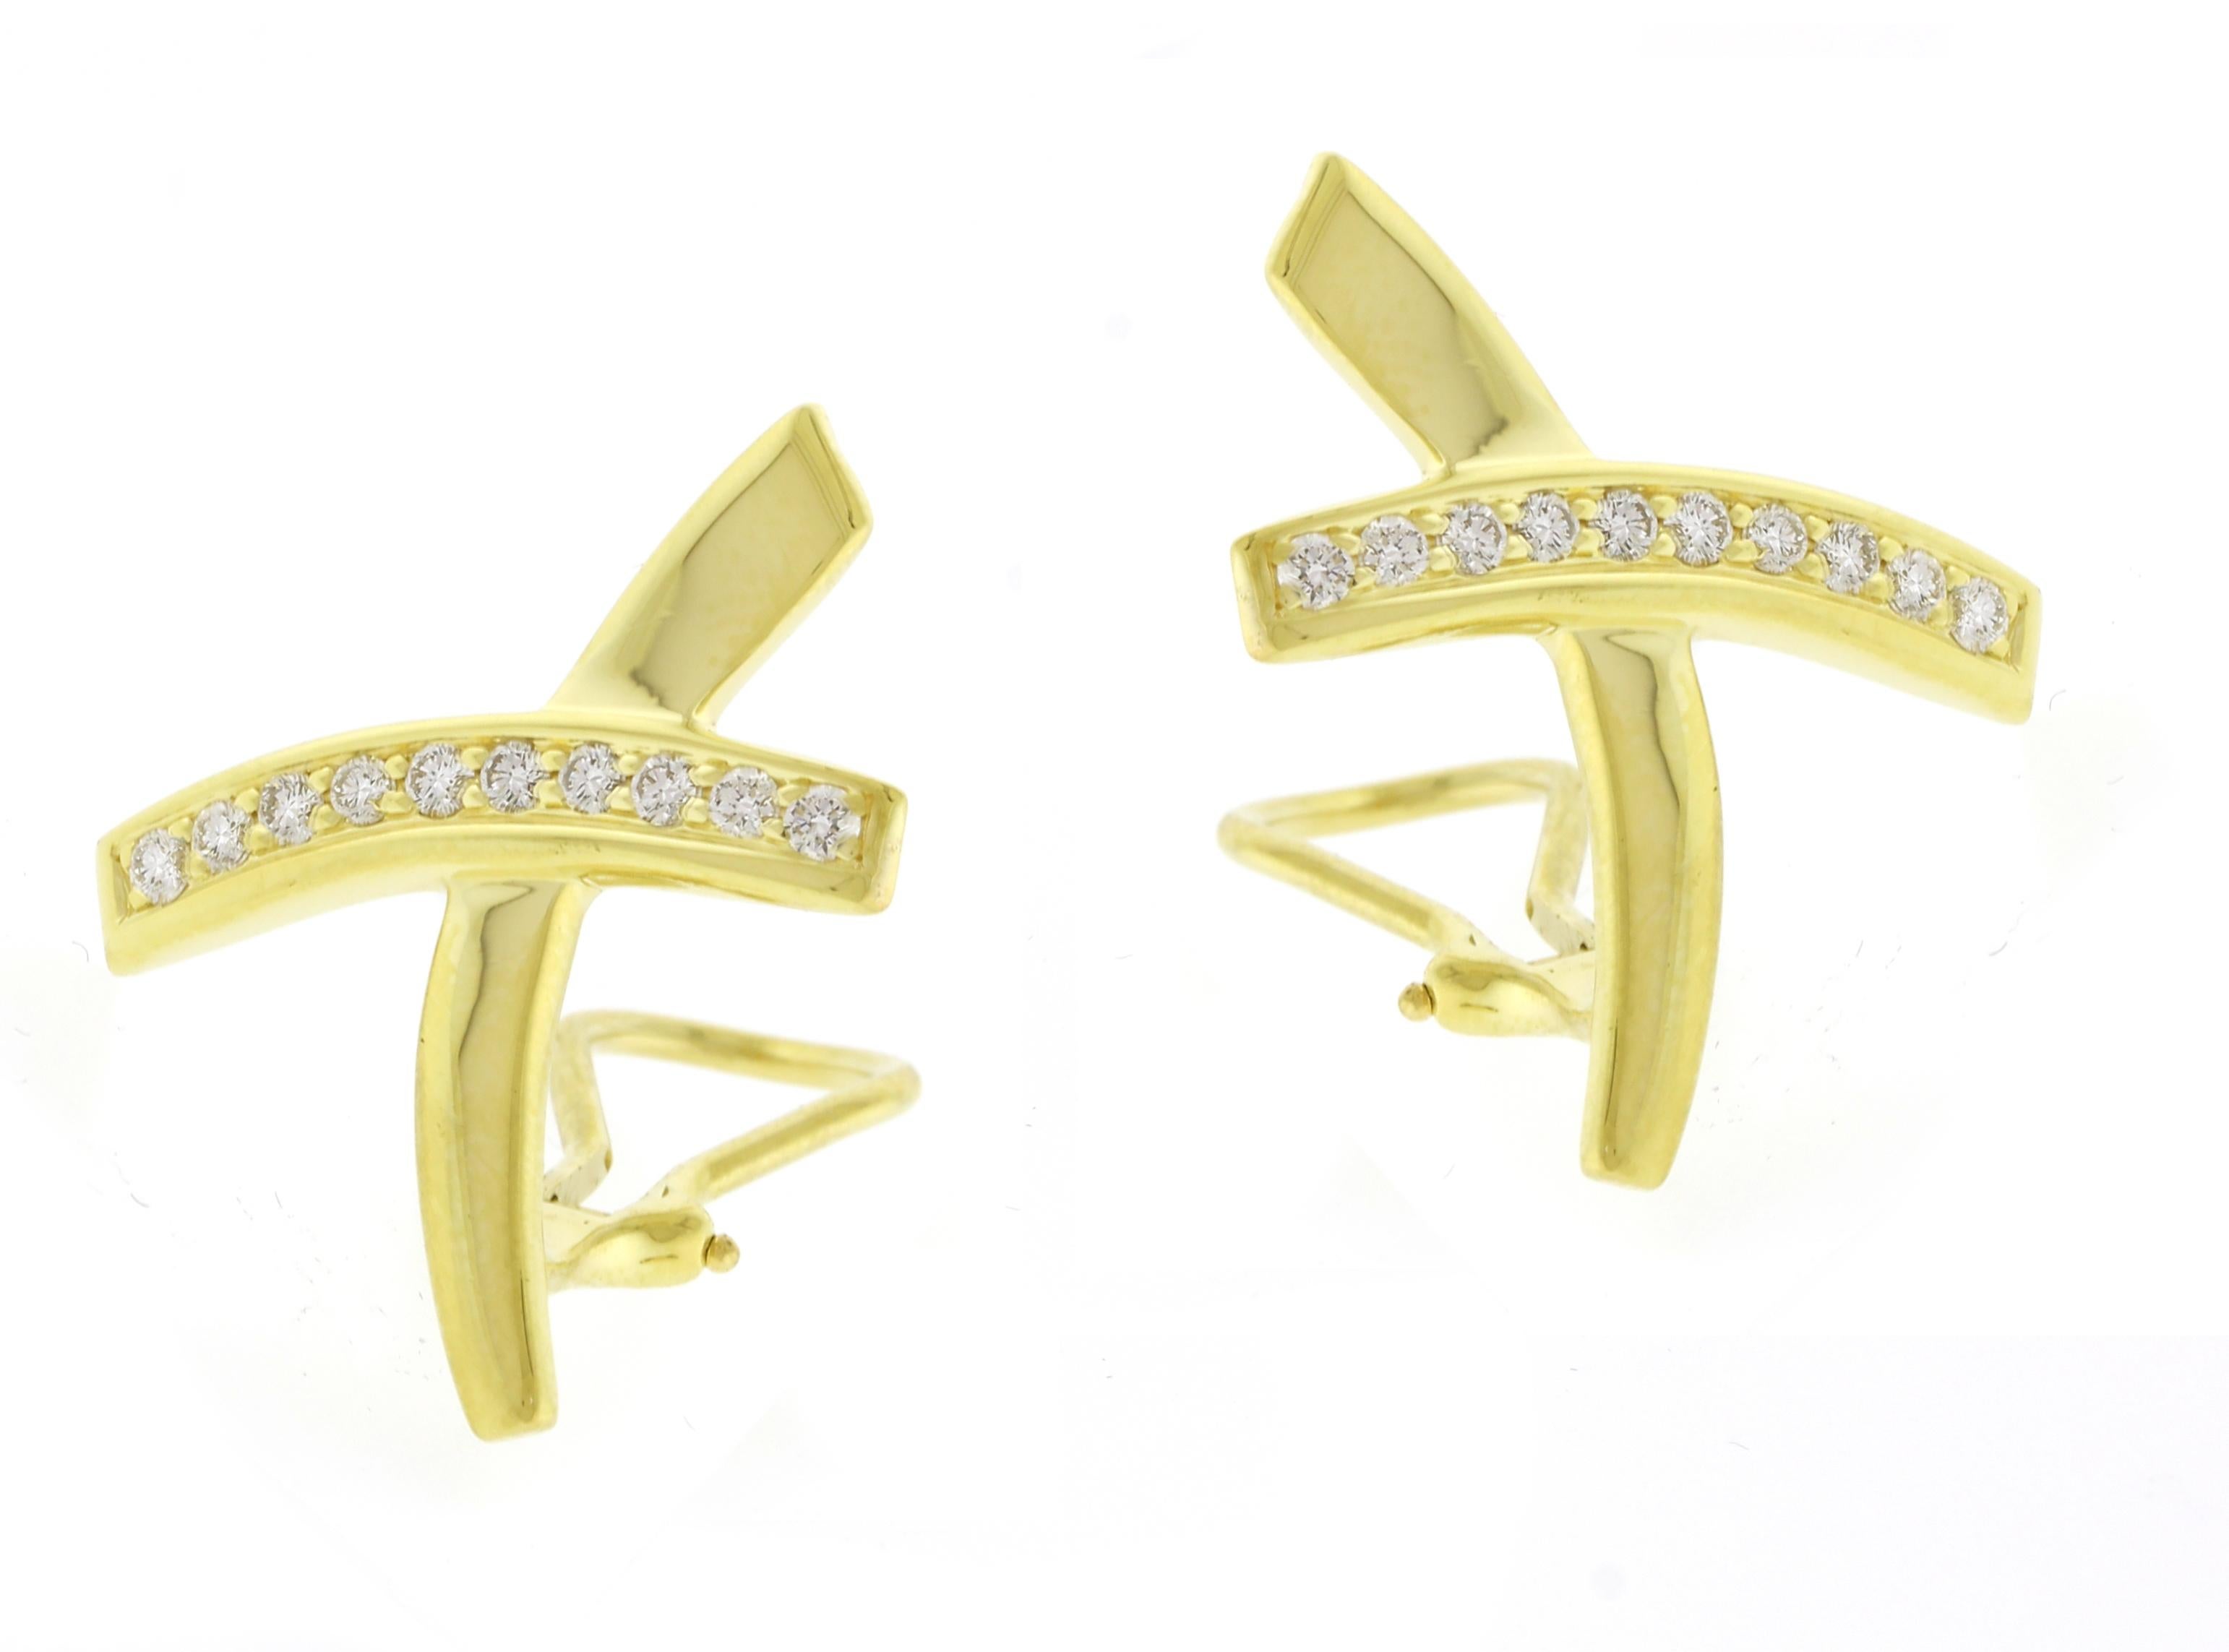 From Tiffany & Co, Paloma Picasso’s designed Graffiti X diamond and 18 karat gold earrings.  
• Designer: Paloma Picasso for Tiffany & Co.
• Metal: 18 karat gold
• Circa: Late 20th Century
• Size: 1 inch by ¾ inch
• 8.9 grams
• 22 Diamonds =.65